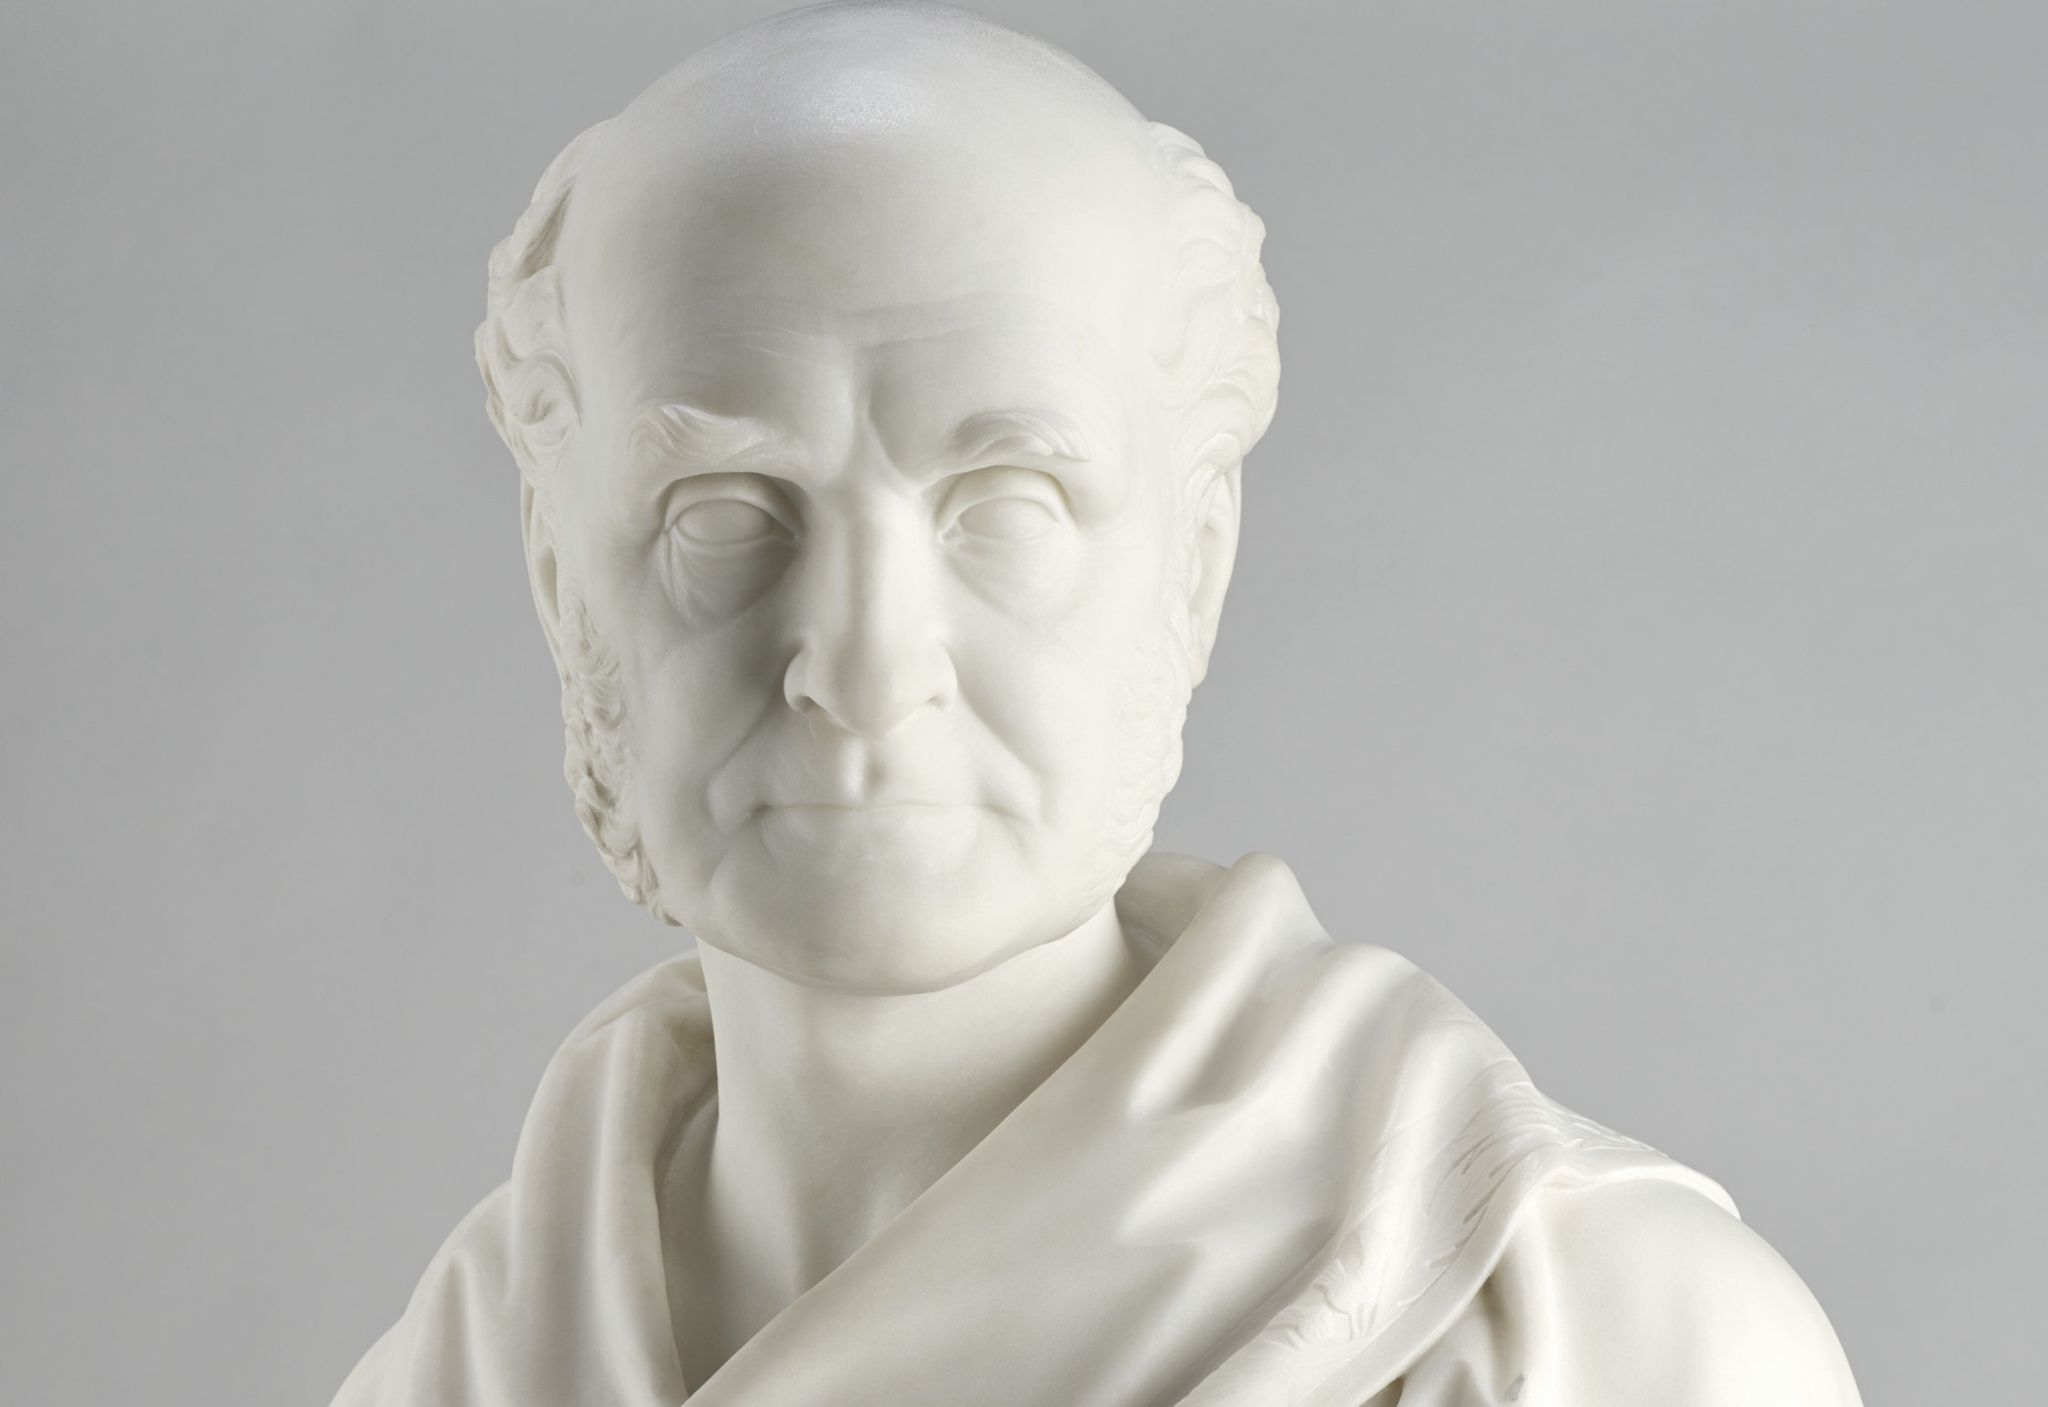 Charles Maclaren, 1782 - 1866. Editor of the Scotsman and geologist